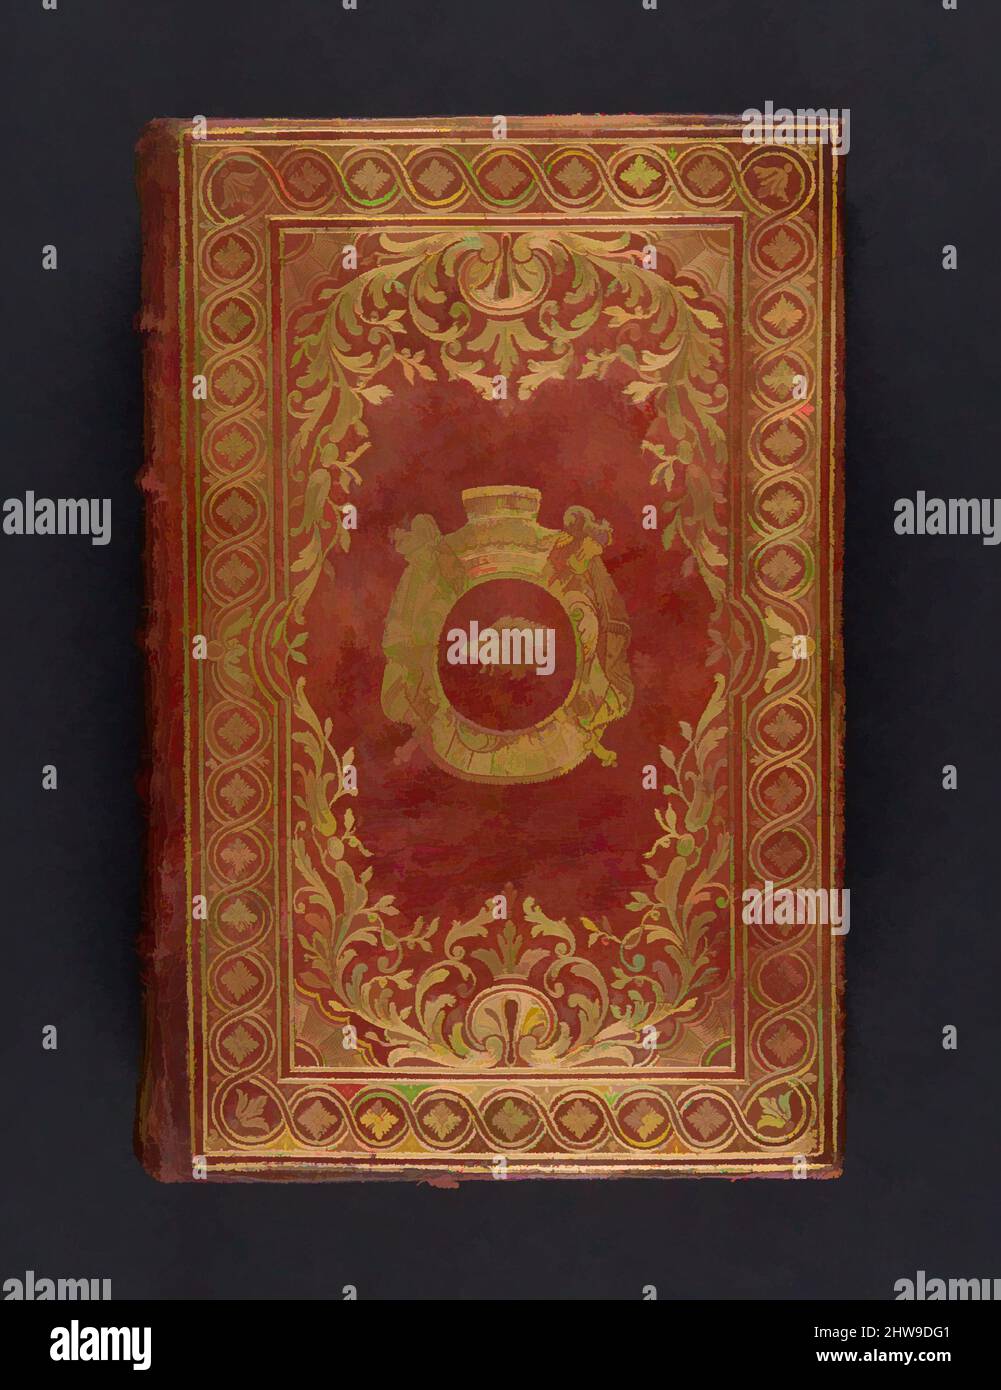 Art inspired by Almanach royal : année bissextile M.DCC.LXXXIV. présenté a Sa Majesté pour la premiere fois en 1699 par Laurent d'Houry ..., 1783, Paris, 683 pages, Contemporary French red morocco with gilt arms on sides of Rene Nicholas Augustin de Maupeou (1714-92), chancellor of, Classic works modernized by Artotop with a splash of modernity. Shapes, color and value, eye-catching visual impact on art. Emotions through freedom of artworks in a contemporary way. A timeless message pursuing a wildly creative new direction. Artists turning to the digital medium and creating the Artotop NFT Stock Photo